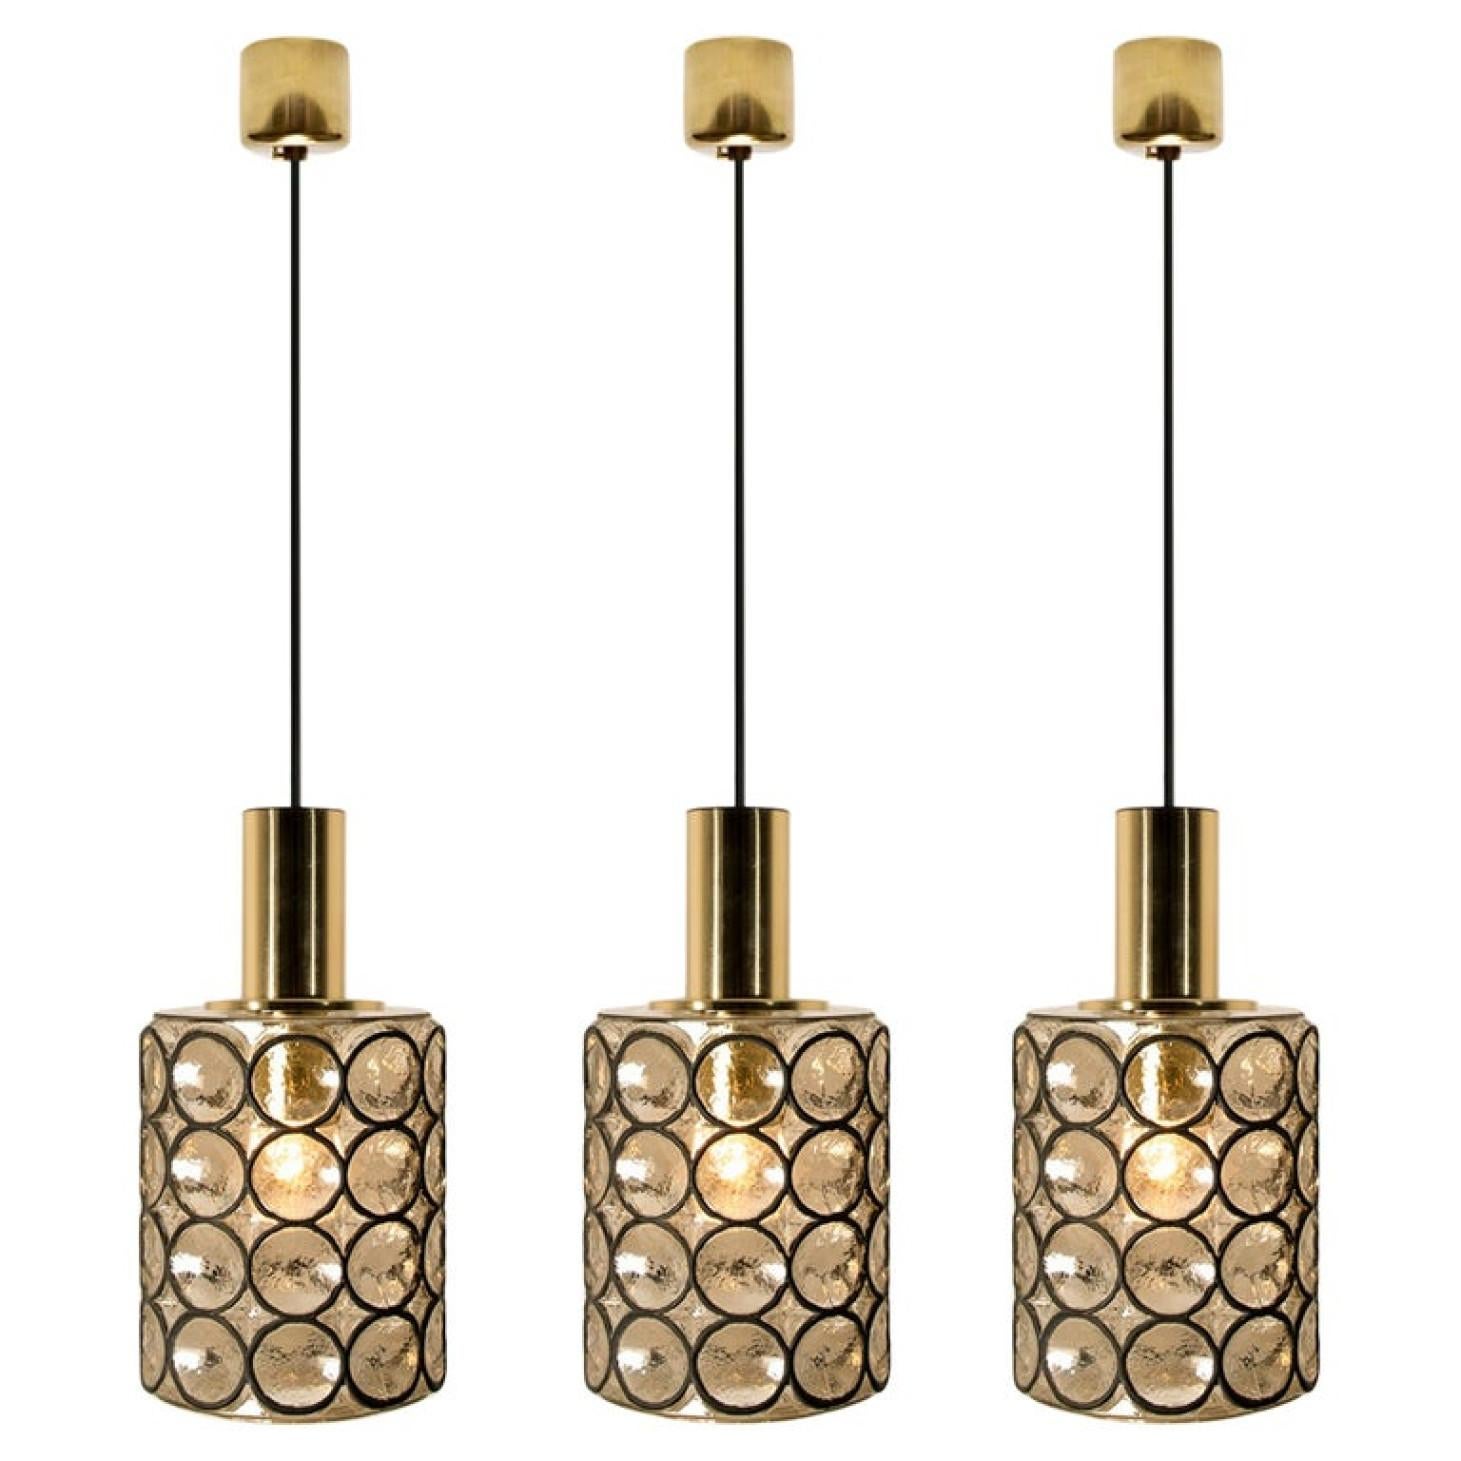 Minimal, geometric and simply shaped design. This beautiful and unique pair of hand blown glass chandeliers/pedant lights were manufactured by Glashütte Limburg in Germany during the 1960s (late 1960s or early 1970s). Beautiful craftsmanship. These